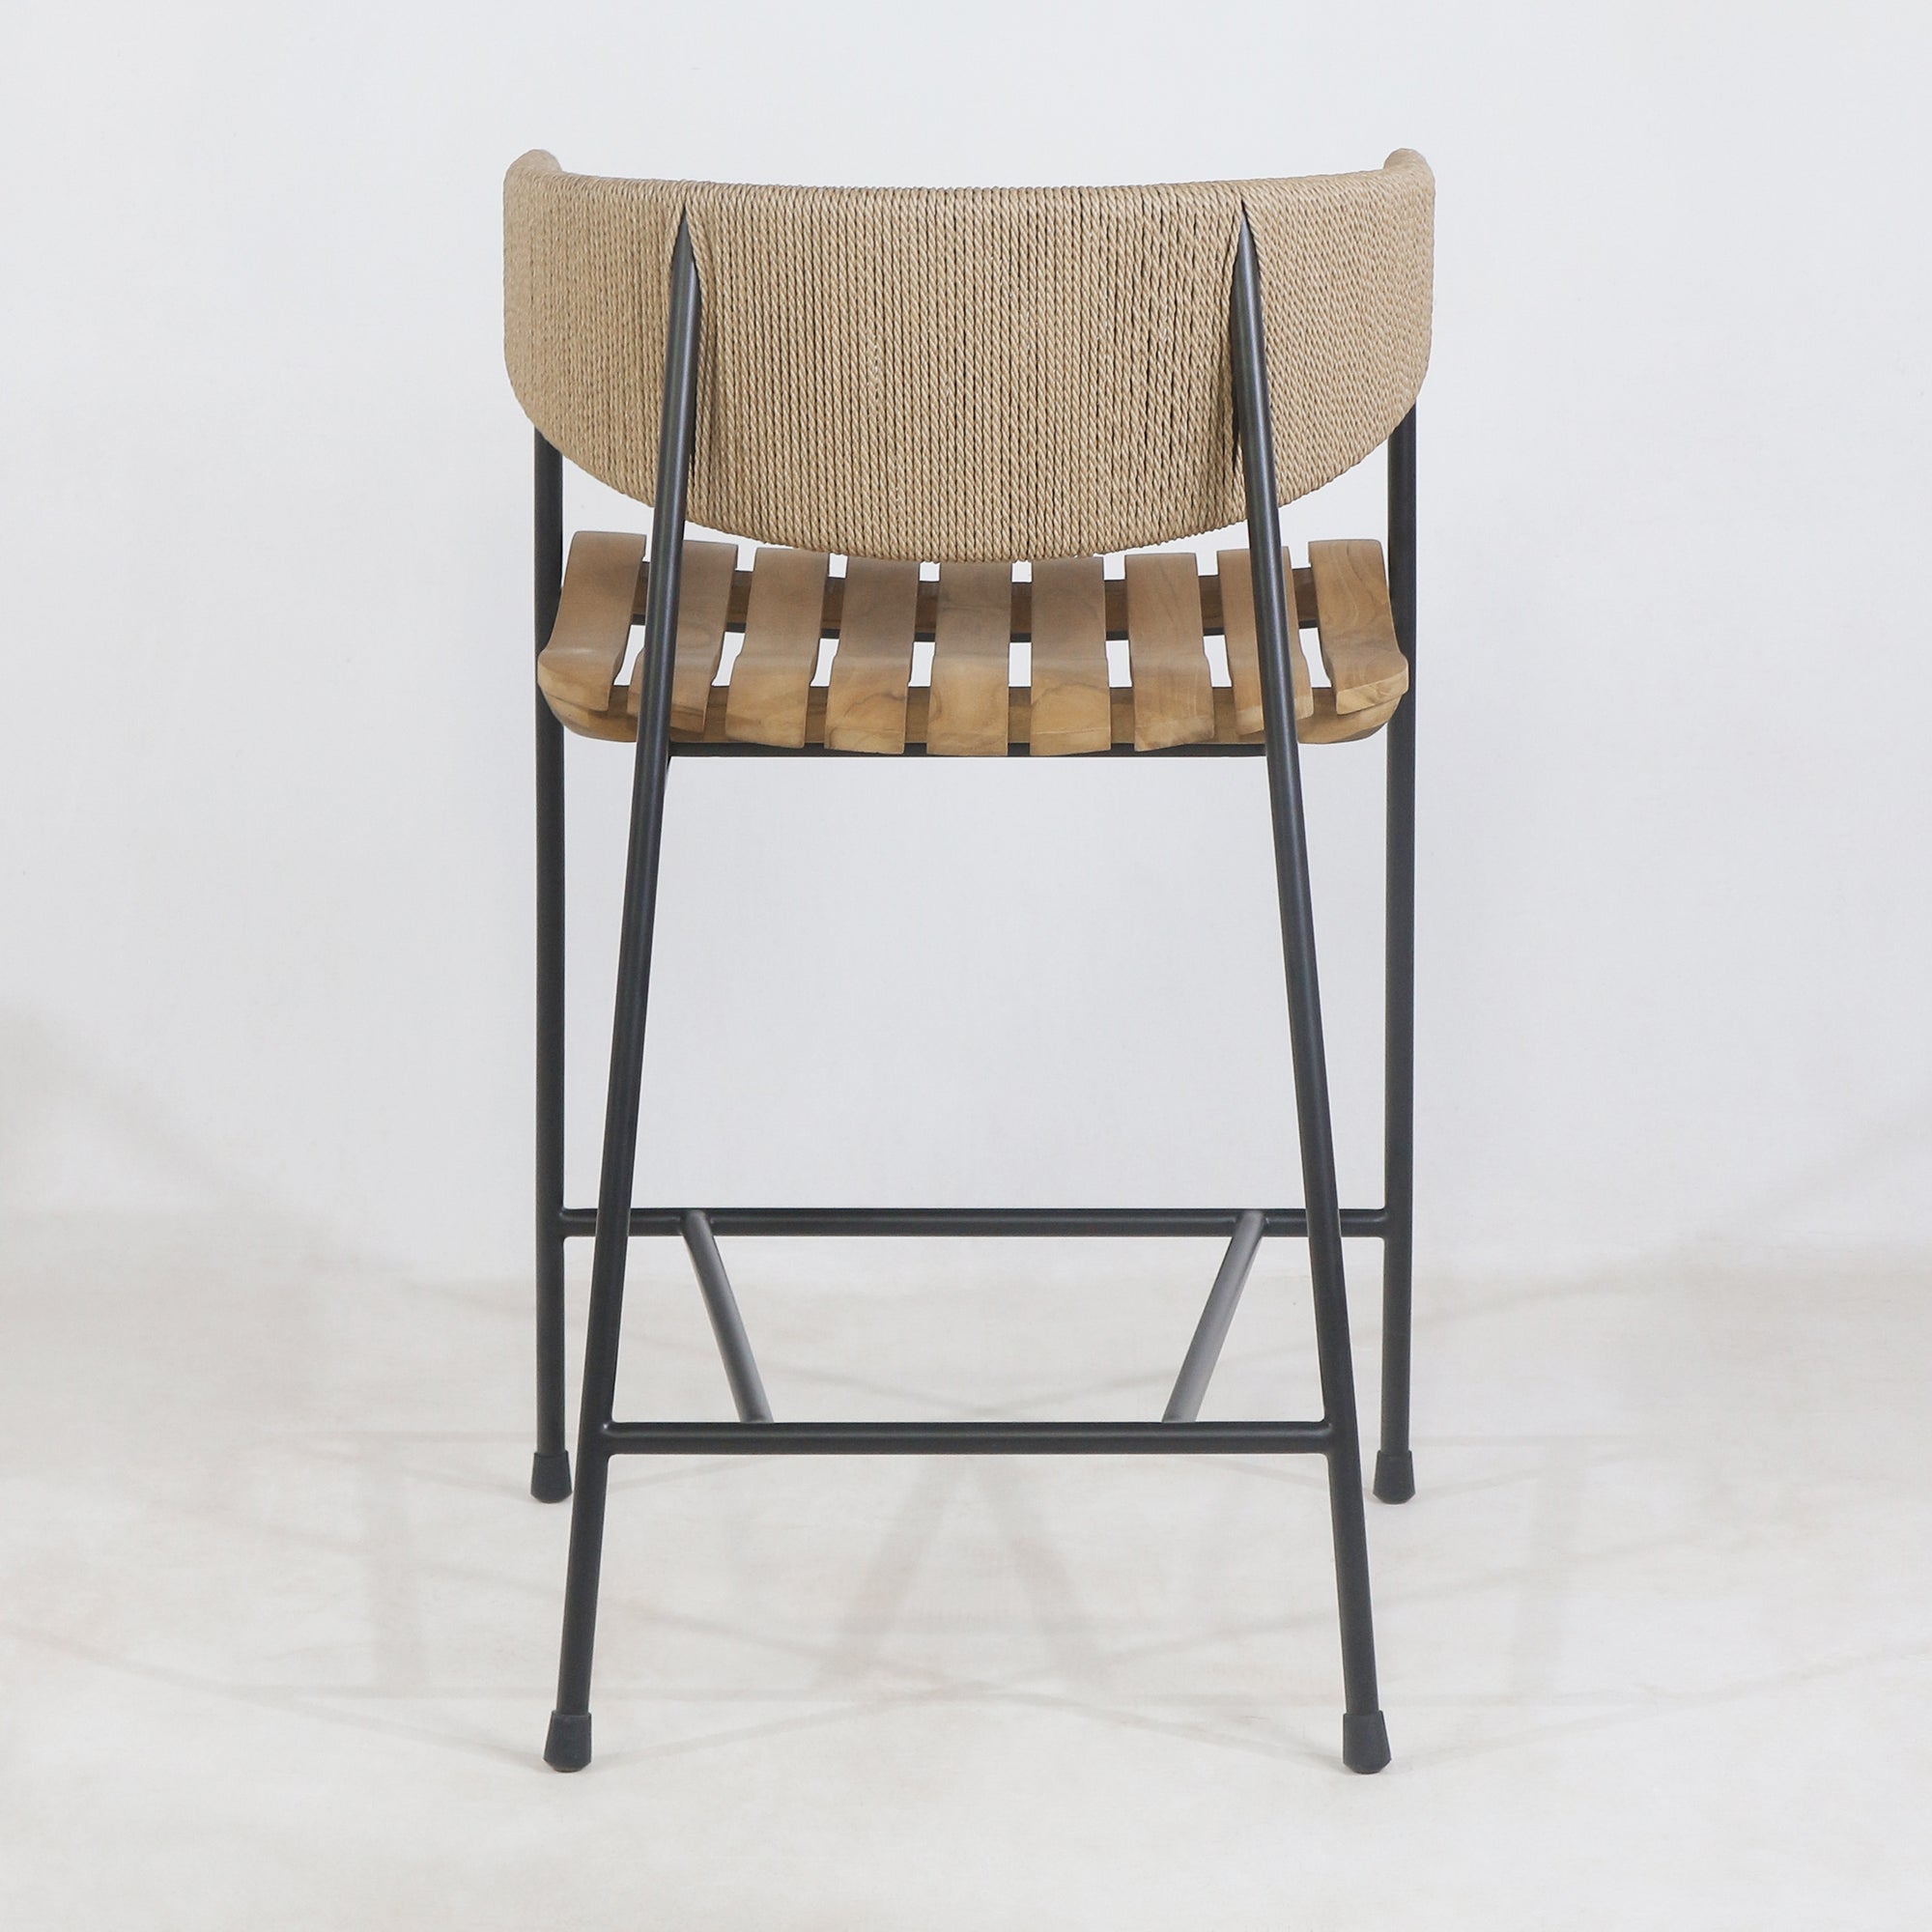 Clara Stool with Teak Seat and Rush Weaving Backrest